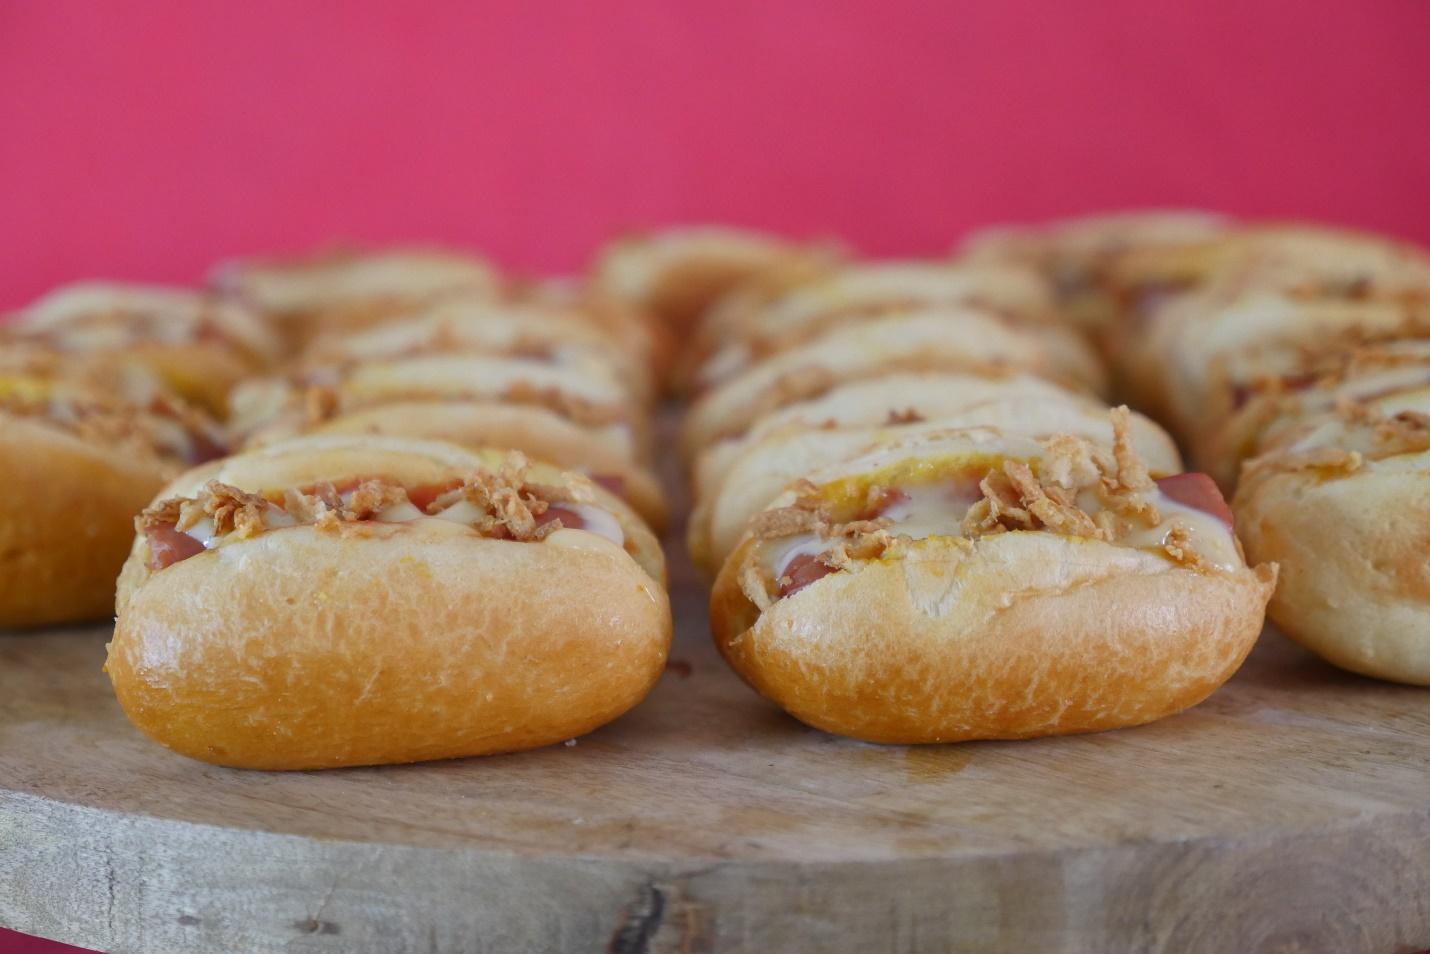 10 Beer Brat Recipes You Should Definitely Try Out